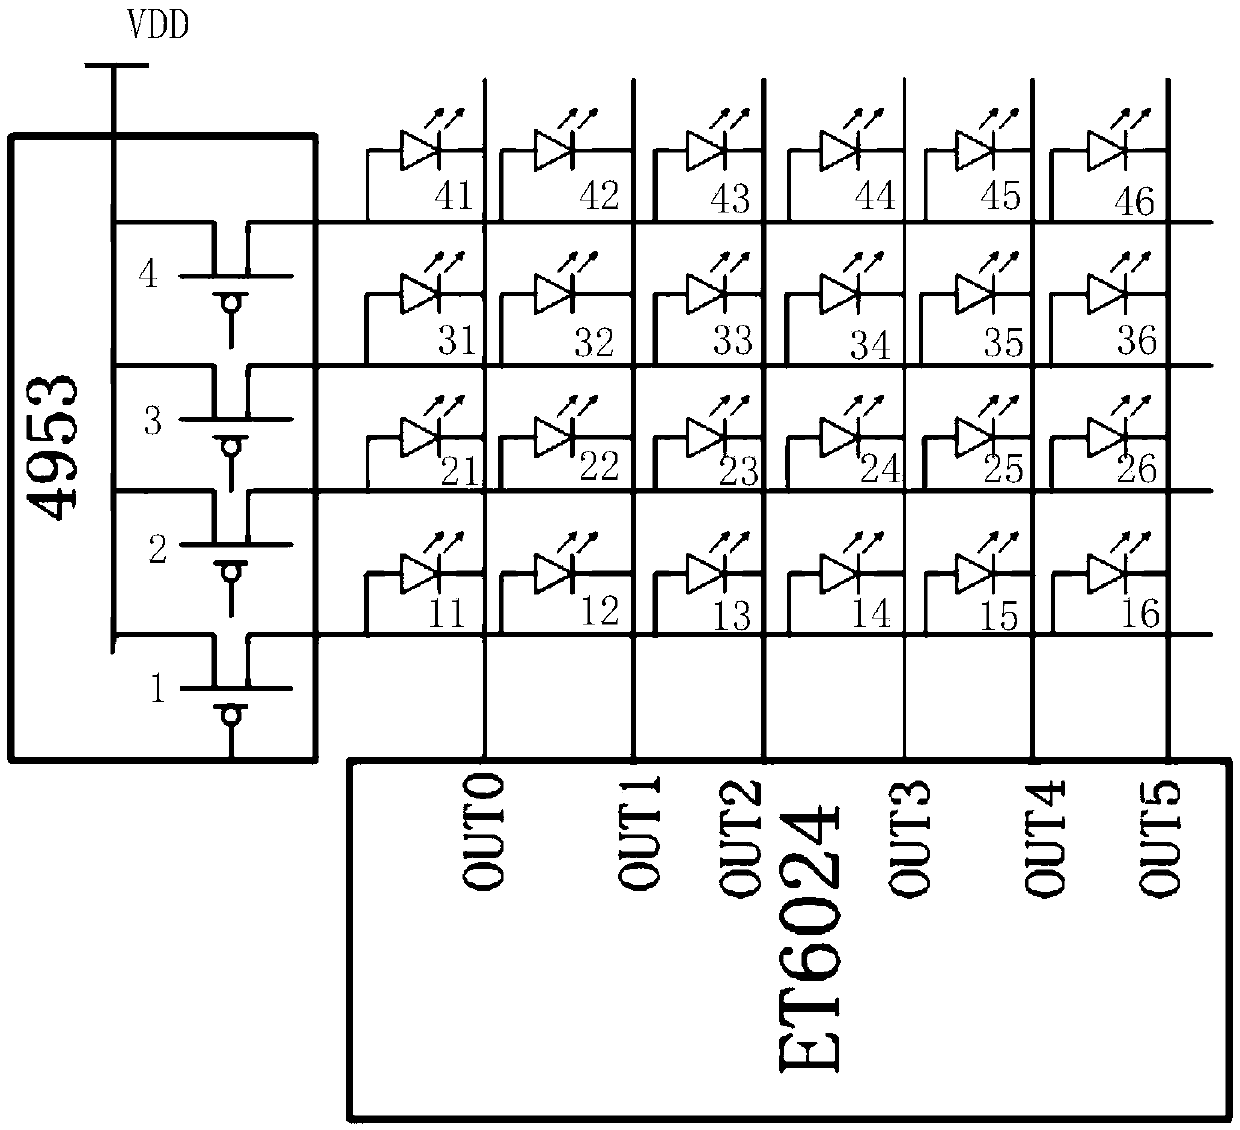 LED display system and its driving circuit that can eliminate the residual image of LED display screen